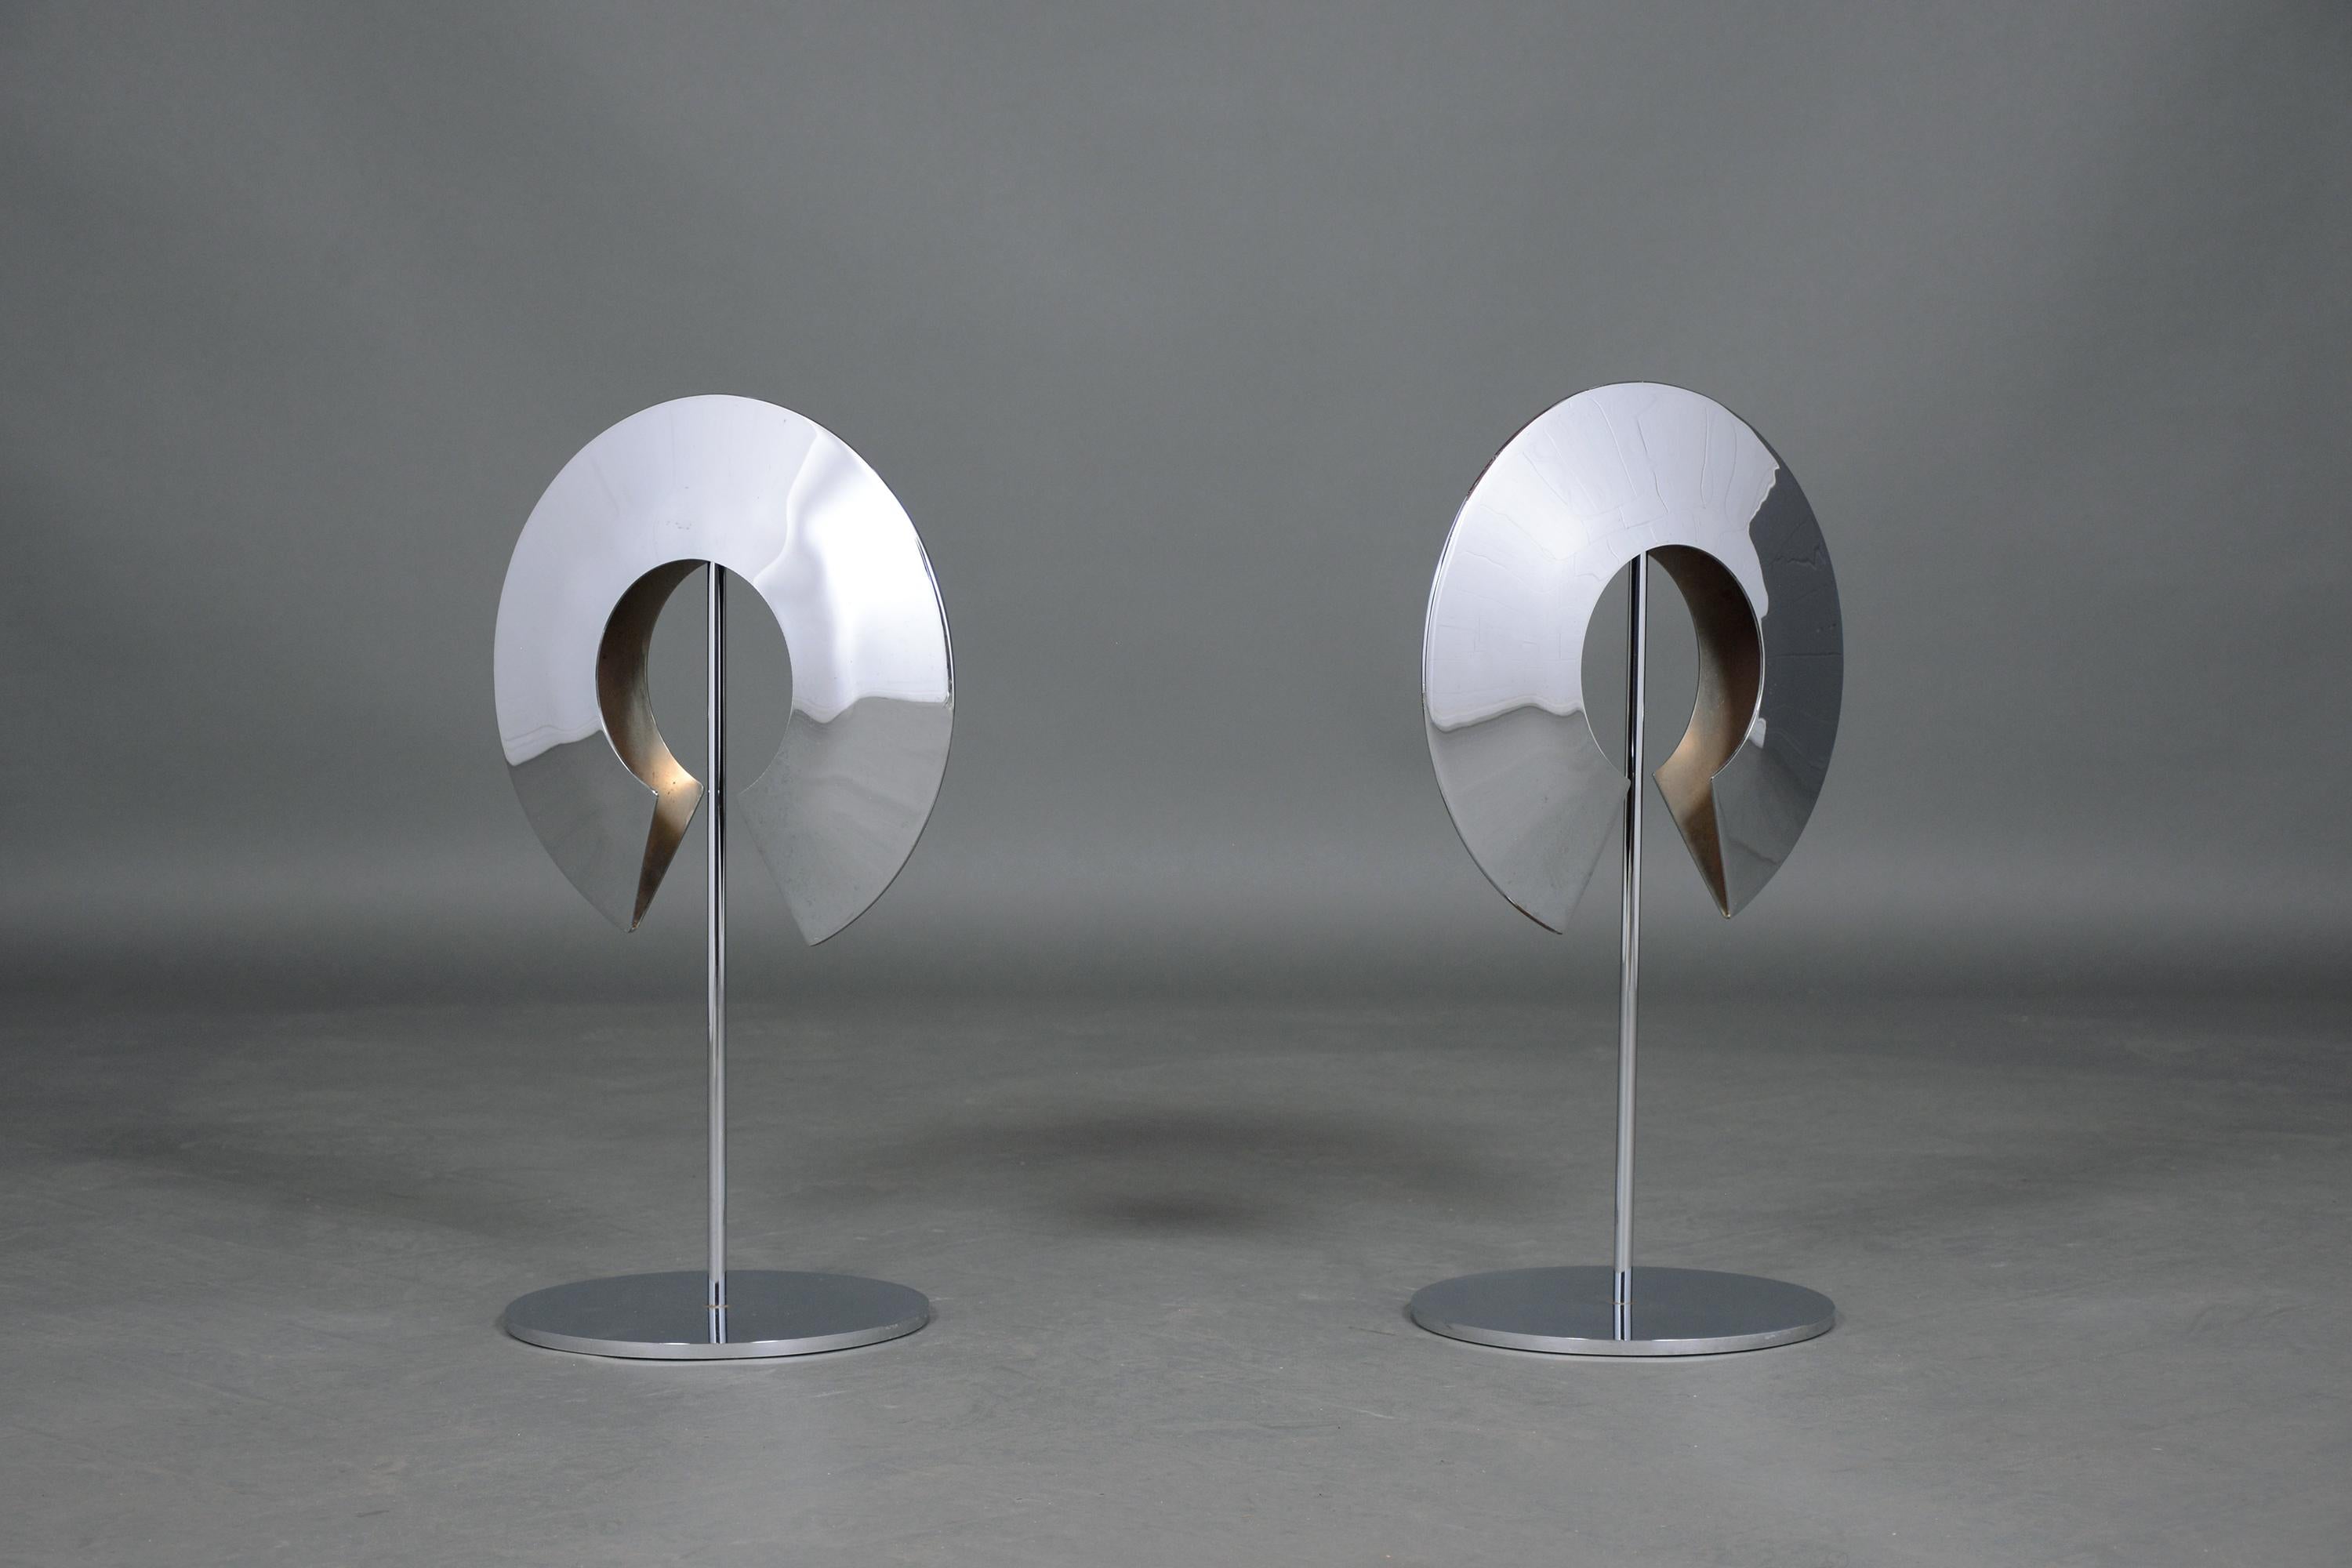 An extraordinary pair of modern sculptures crafted out of steel finished in chrome. These eye catching pieces are in good condition and they feature a crescent design supported by a circular base.